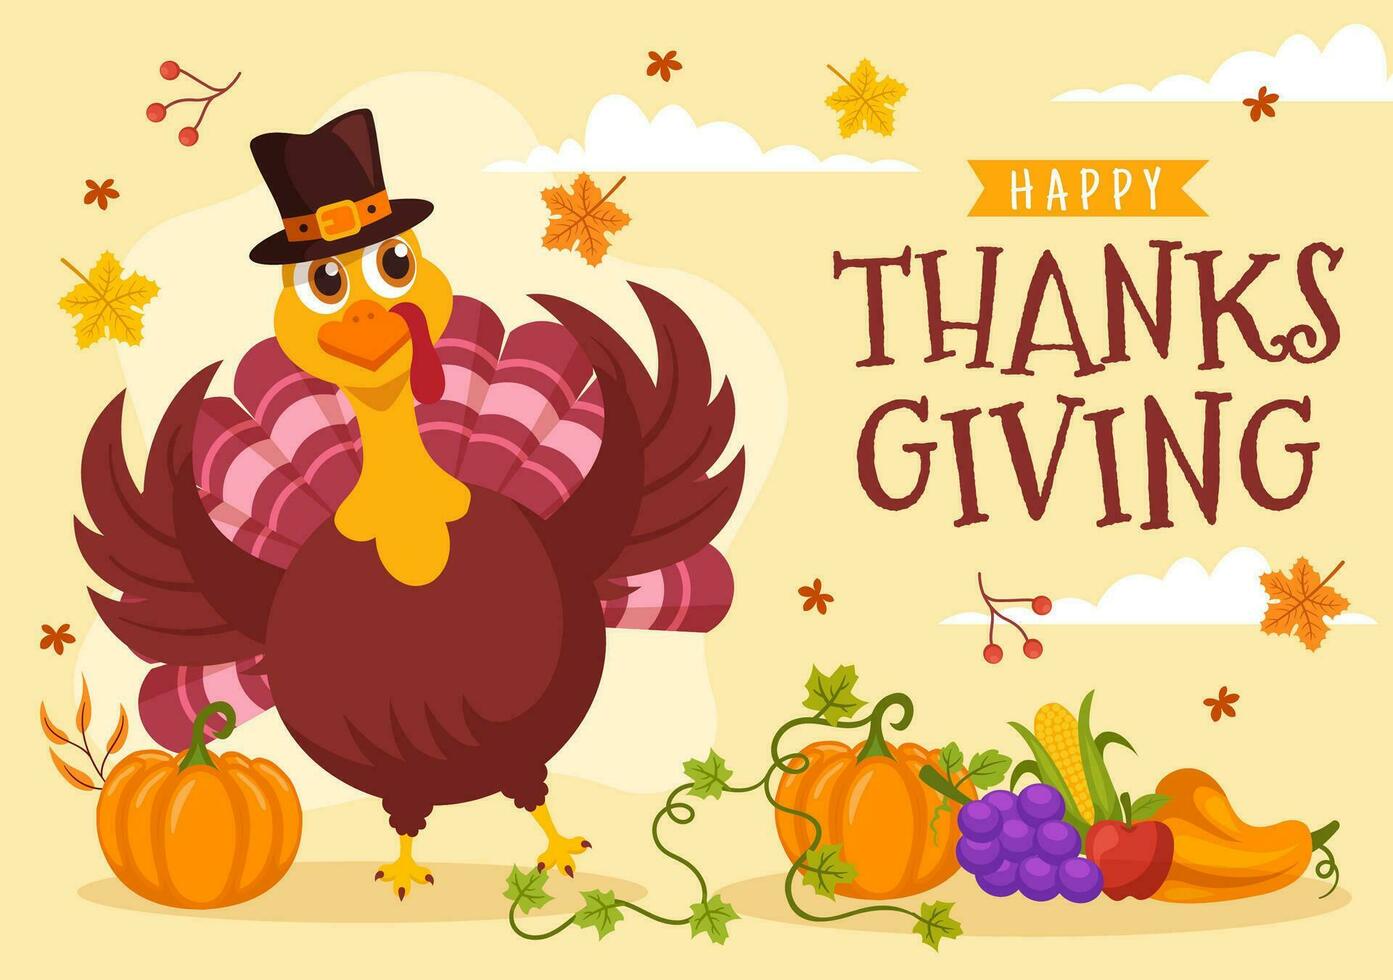 Happy Thanksgiving Day Vector Illustration with Turkey Bird, Pumpkin, Leaves and Many Others Elements Background Flat Cartoon Hand Drawn Templates